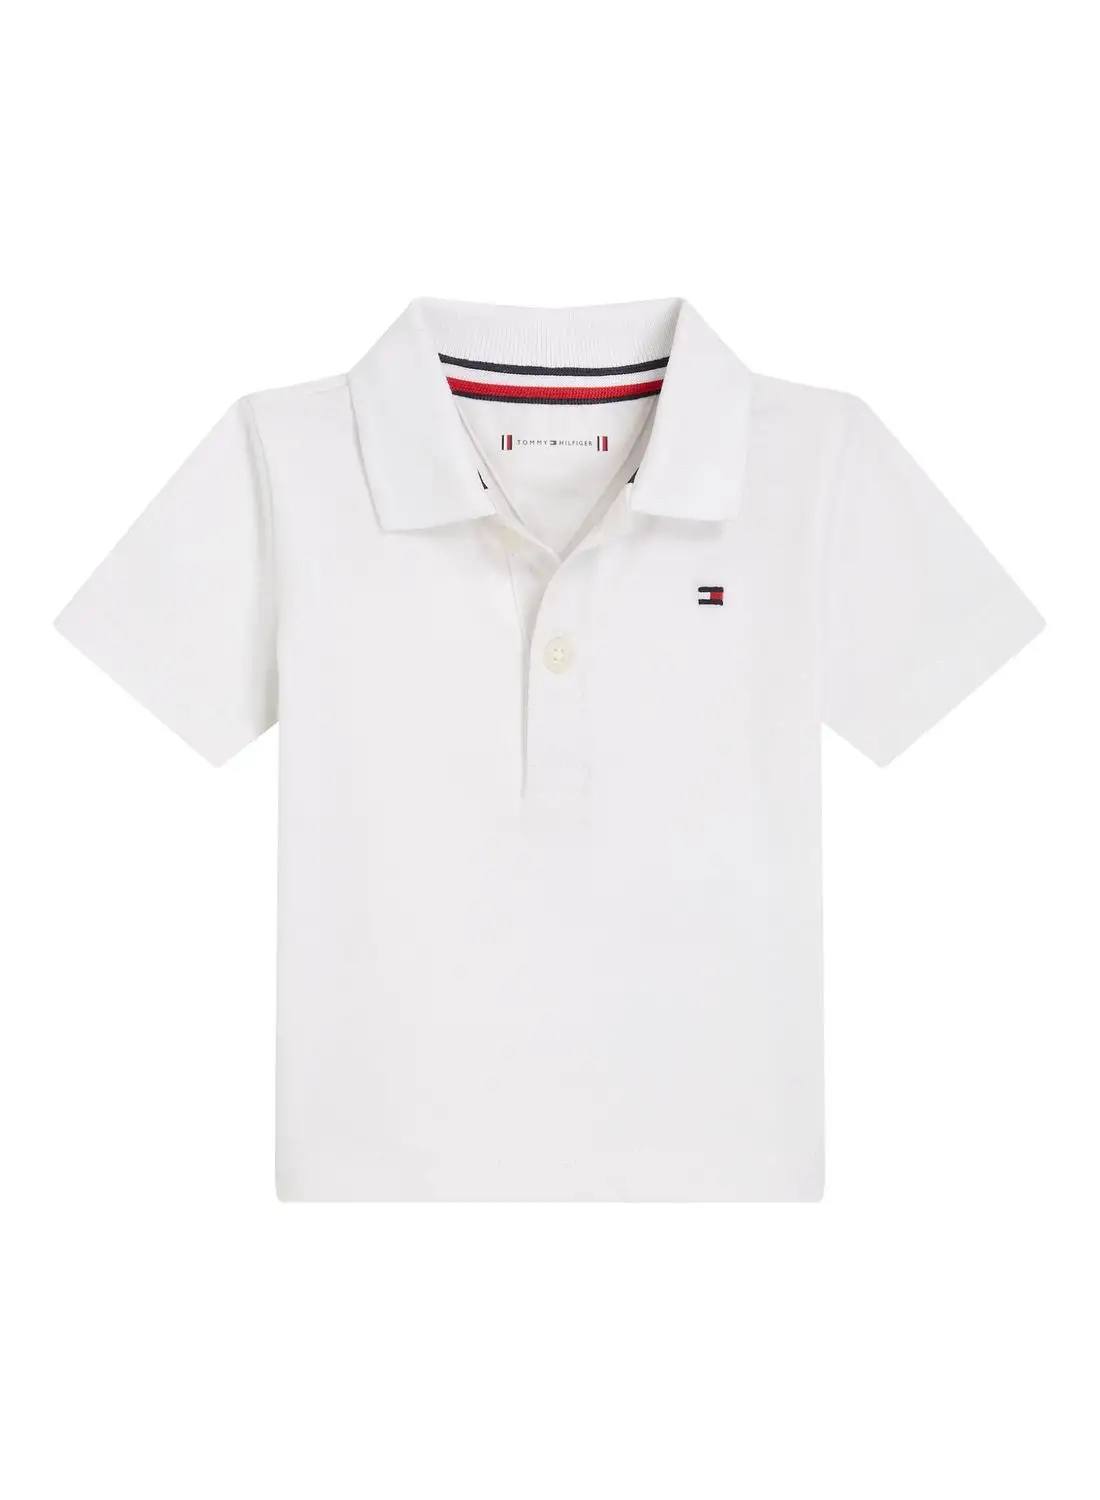 TOMMY HILFIGER Infant Essential Polo